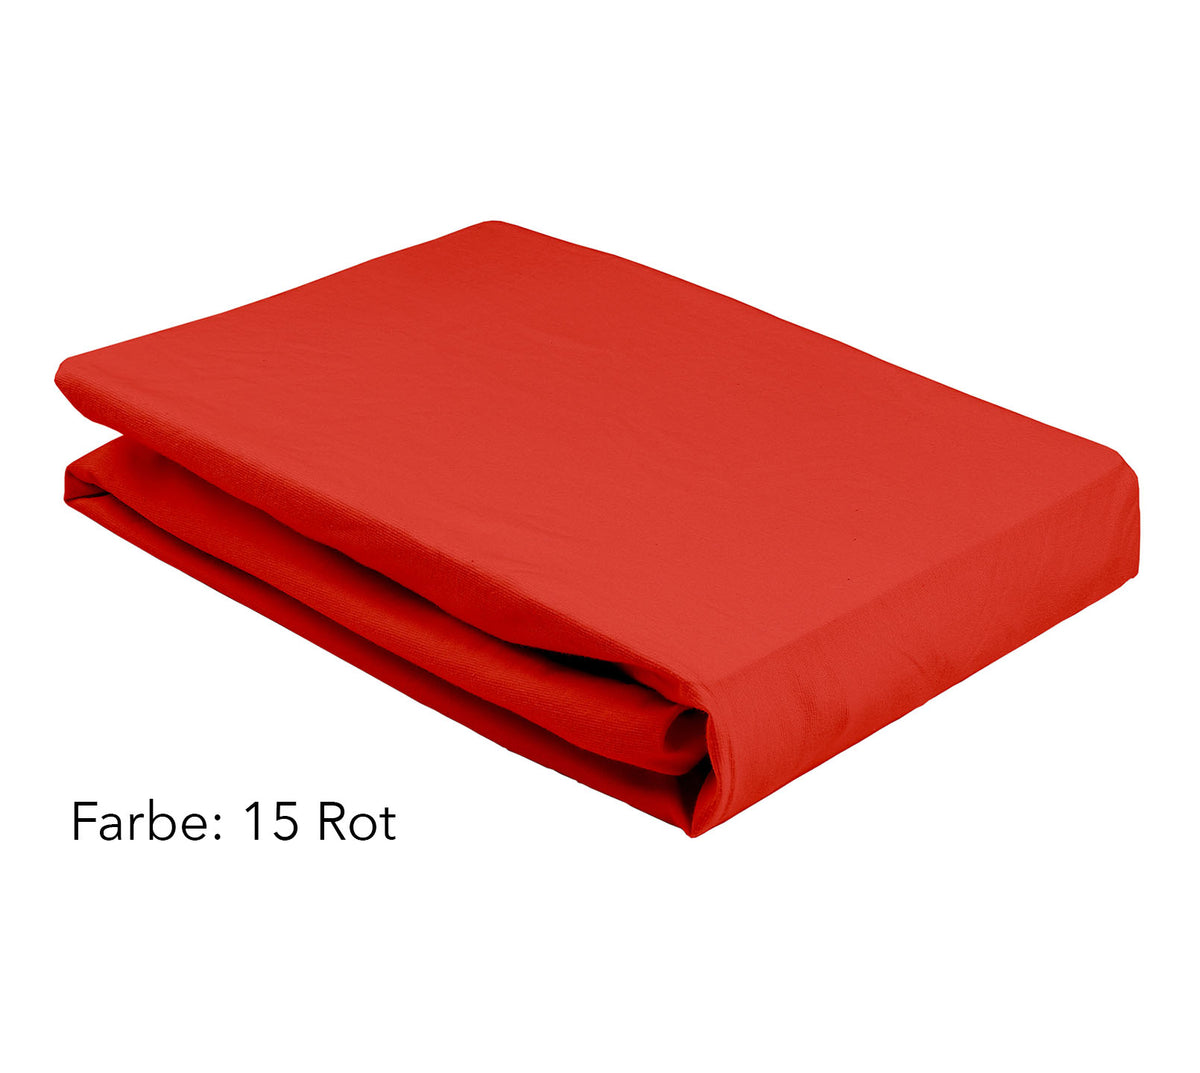 Jersey Spannbettlaken Farbe Rot Material Jersey #farbe_Rot #farbe_Rot